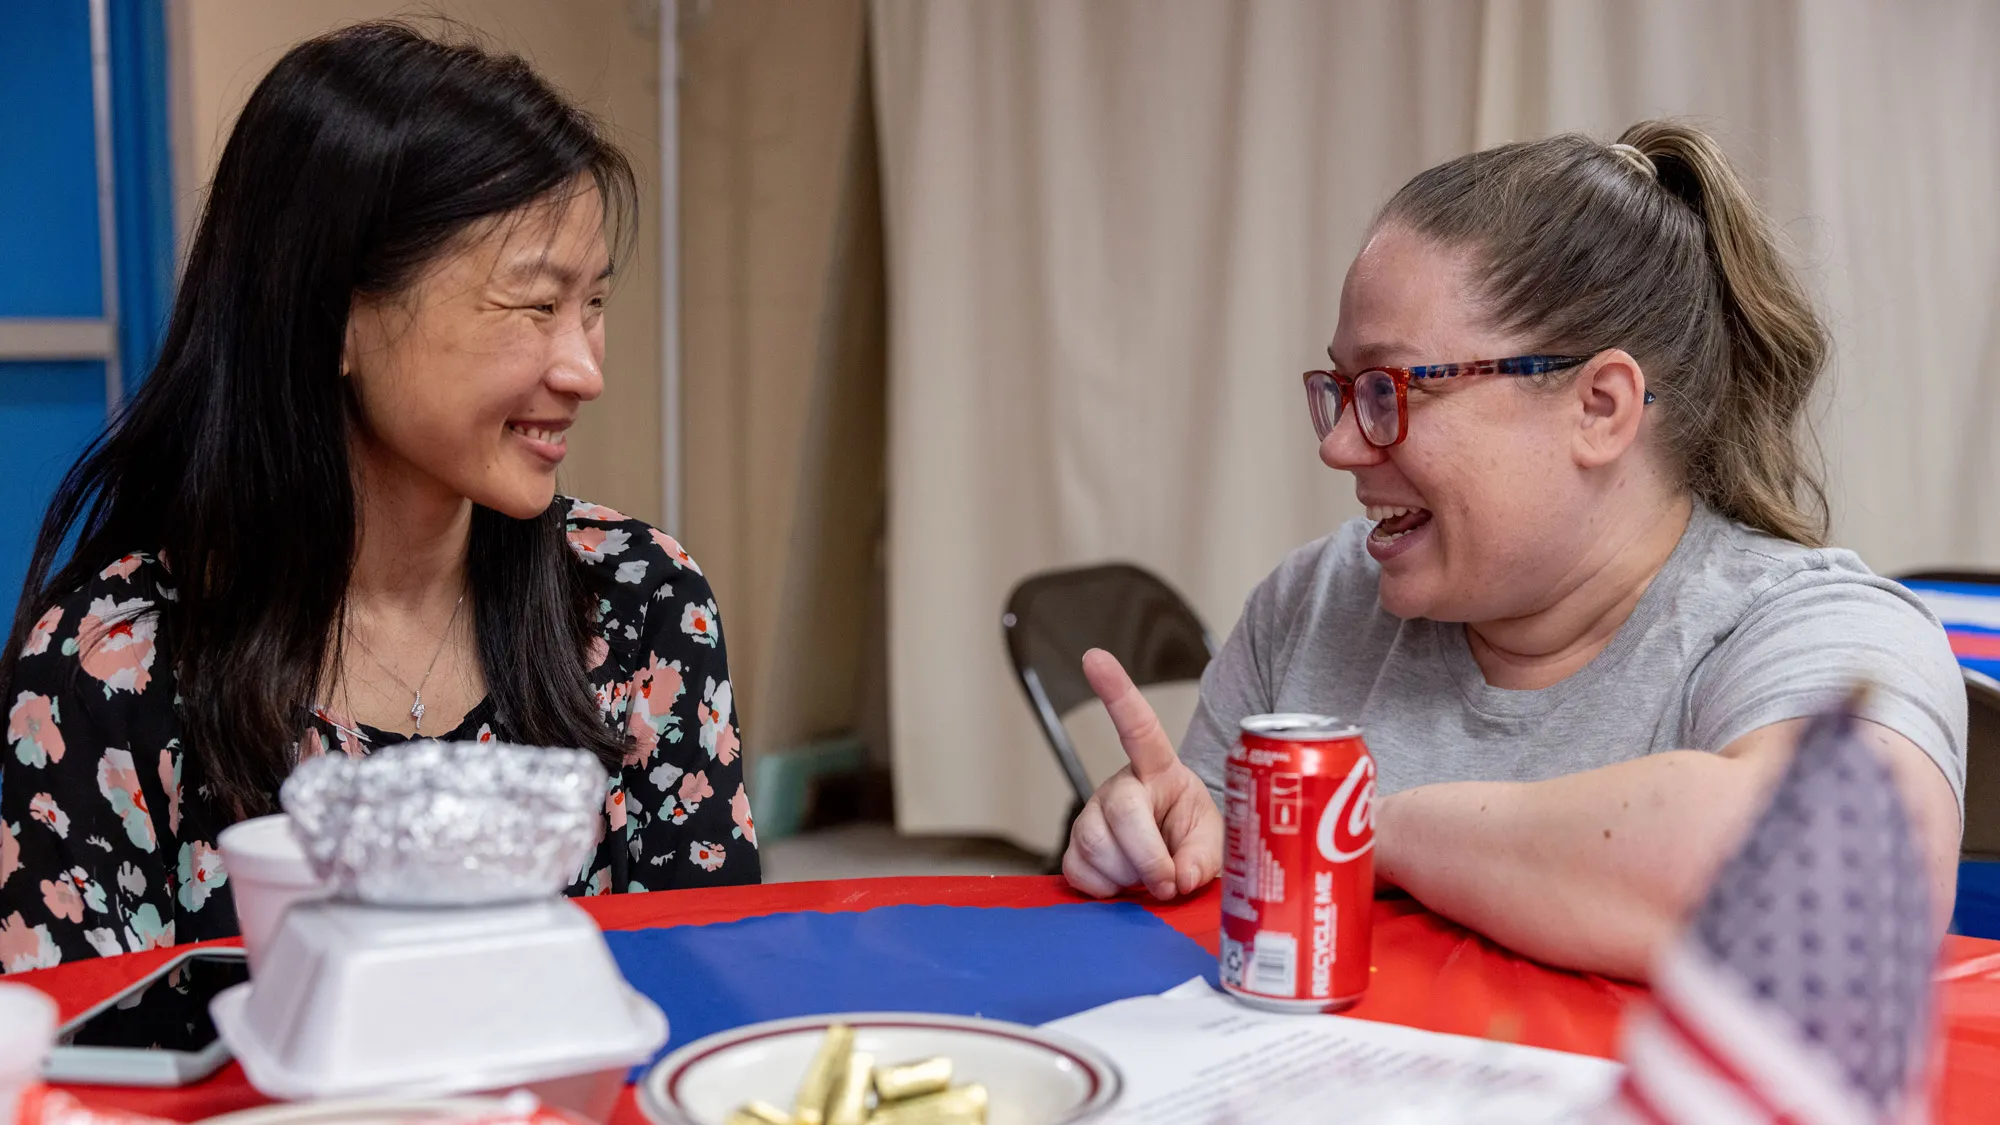 Kneeling next to a table, Gretchen Klingler chats with the woman sitting there. They’re smiling as they focus on each other. The woman is Susan Louderback, a woman of Asian descent with long hair and a flowered top. Gretchen has her hair pulled up in a ponytail. 